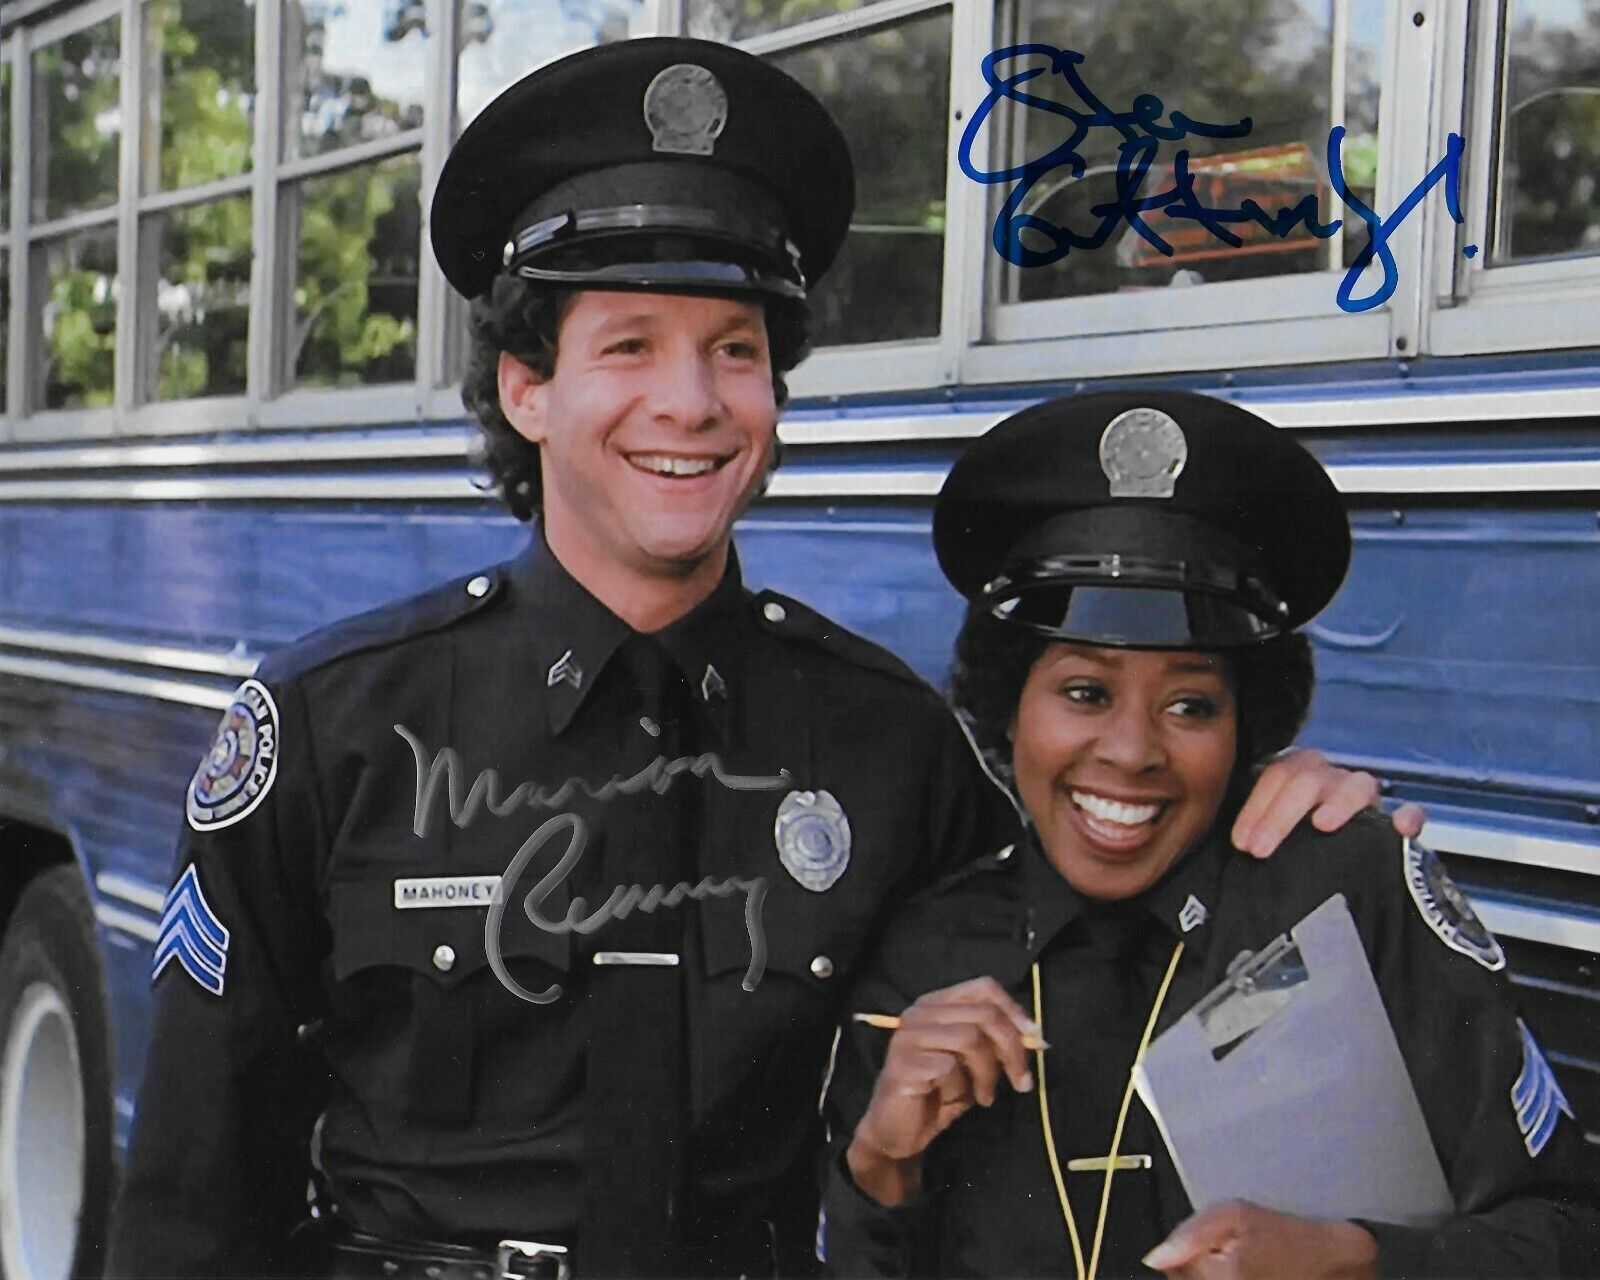 Steve Guttenberg Marion Ramsey Police Academy Original Autographed 8X10 Photo Poster painting